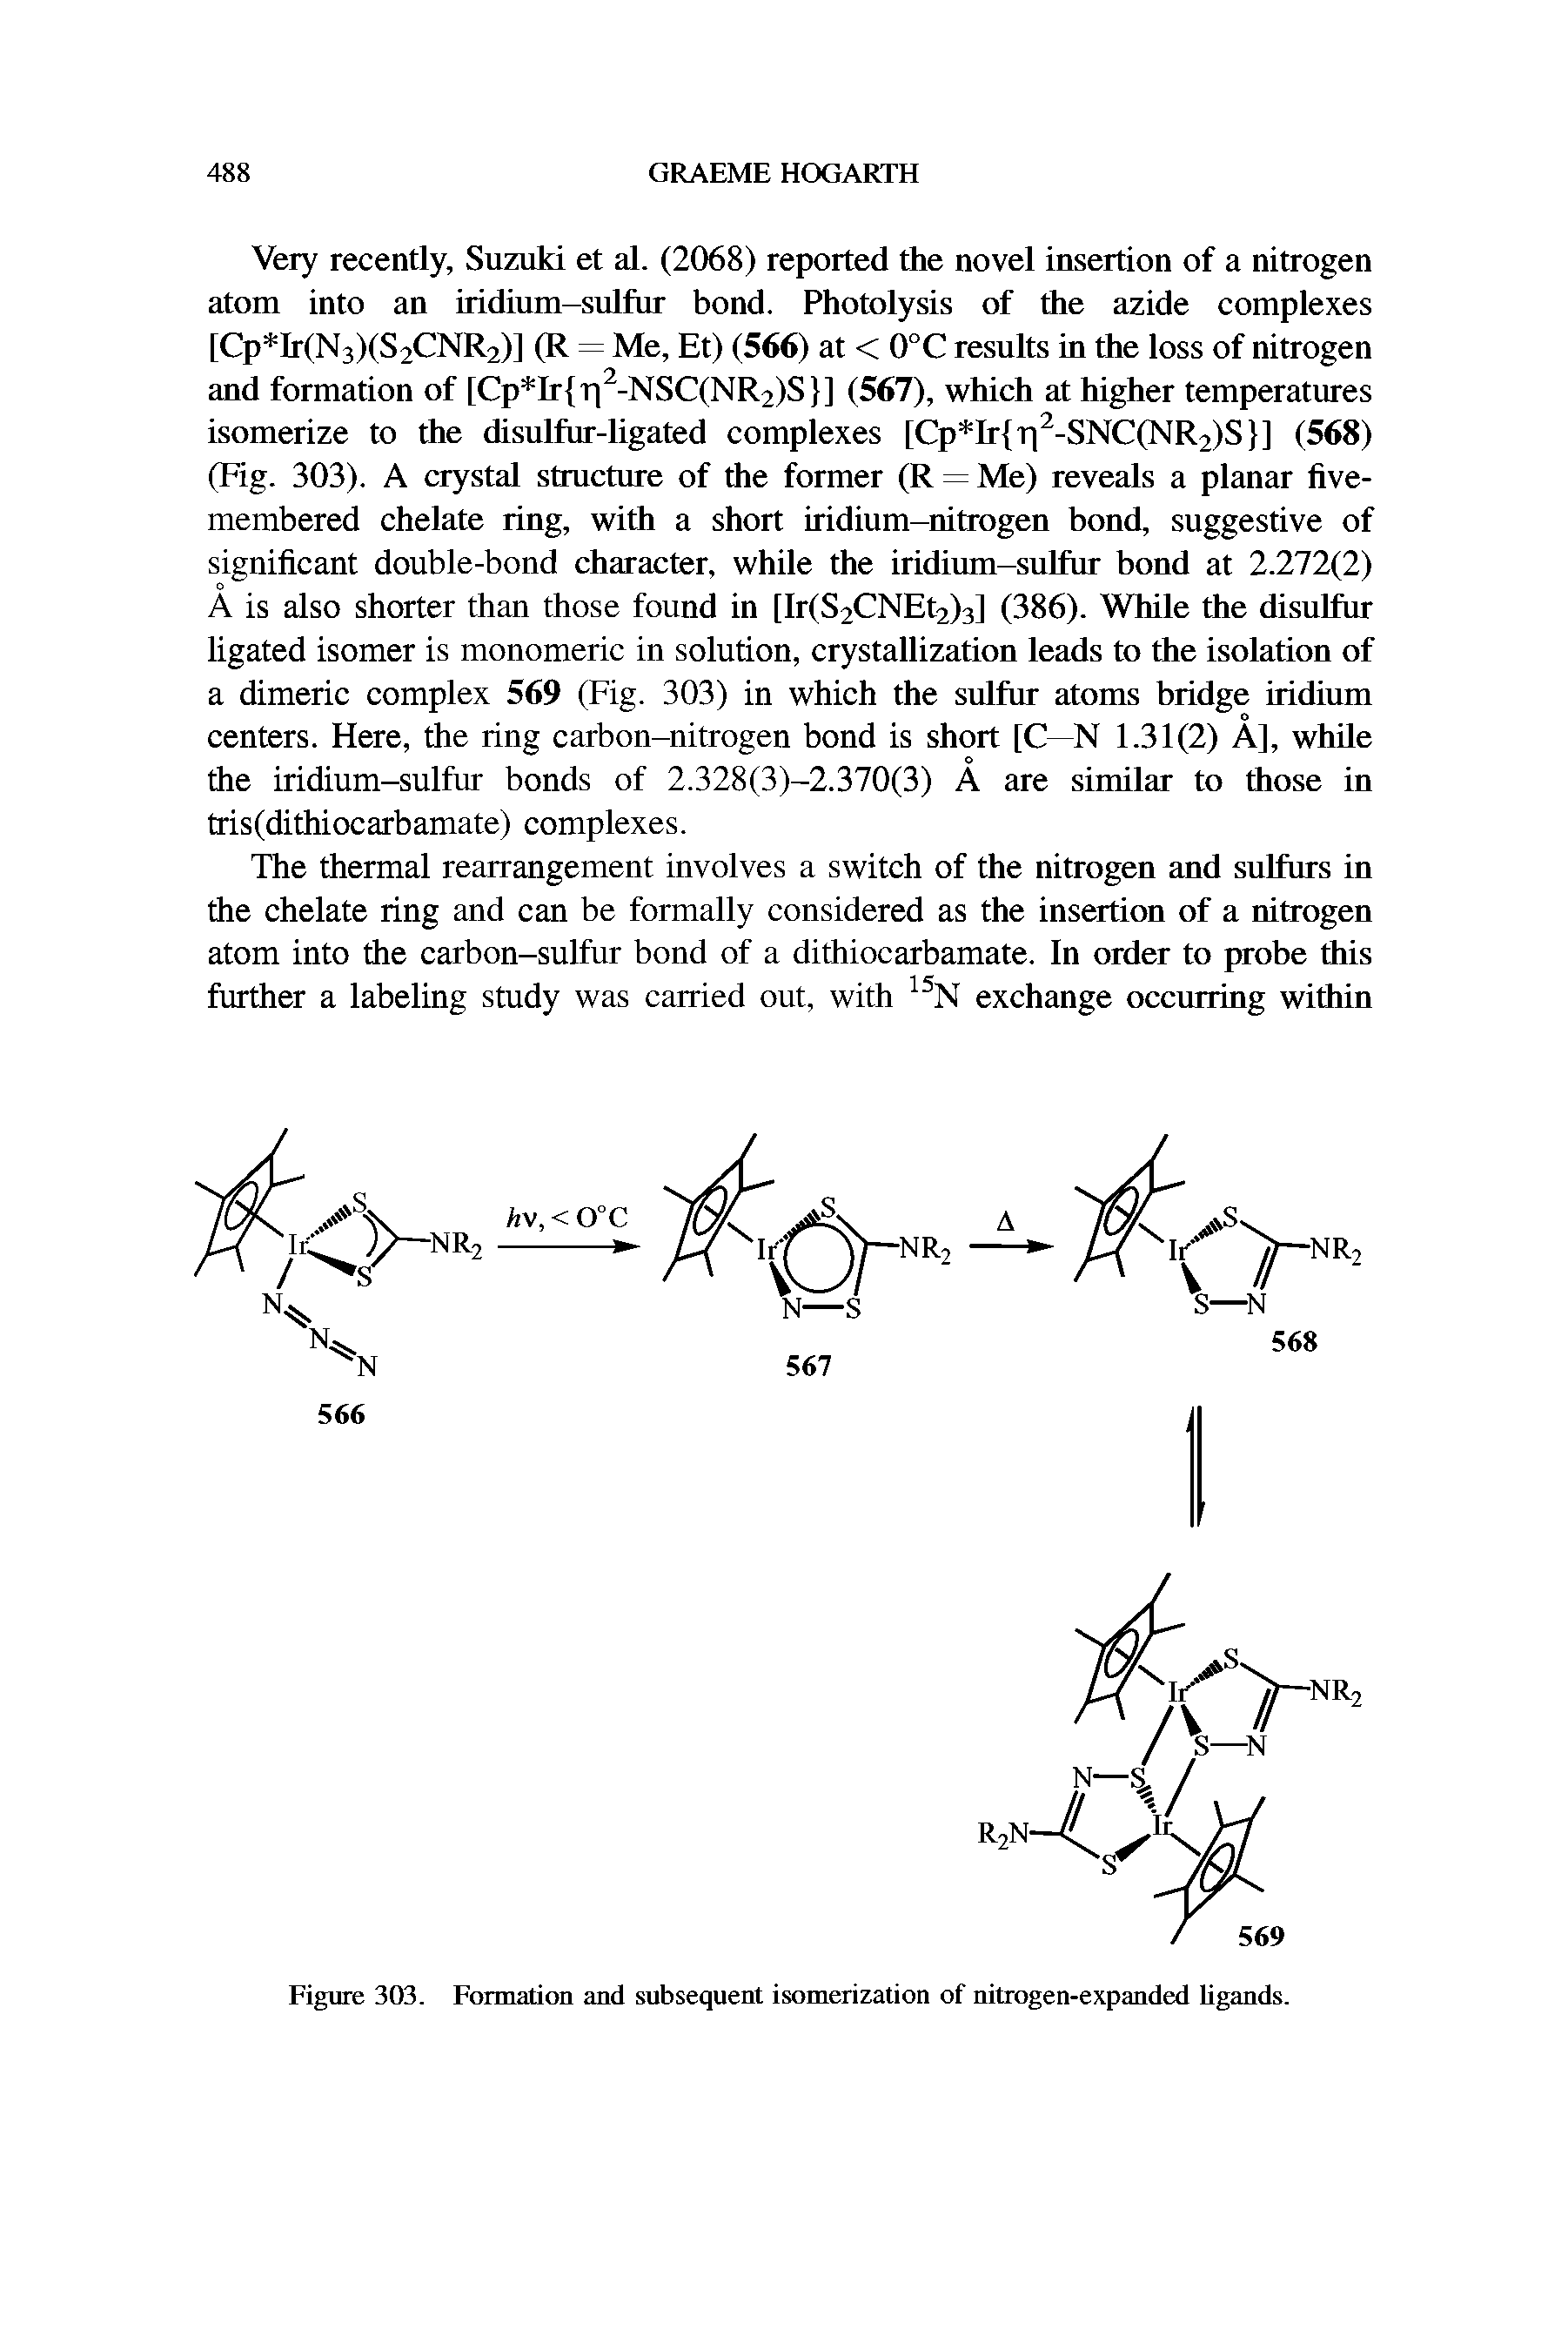 Figure 303. Formation and subsequent isomerization of nitrogen-expanded ligands.